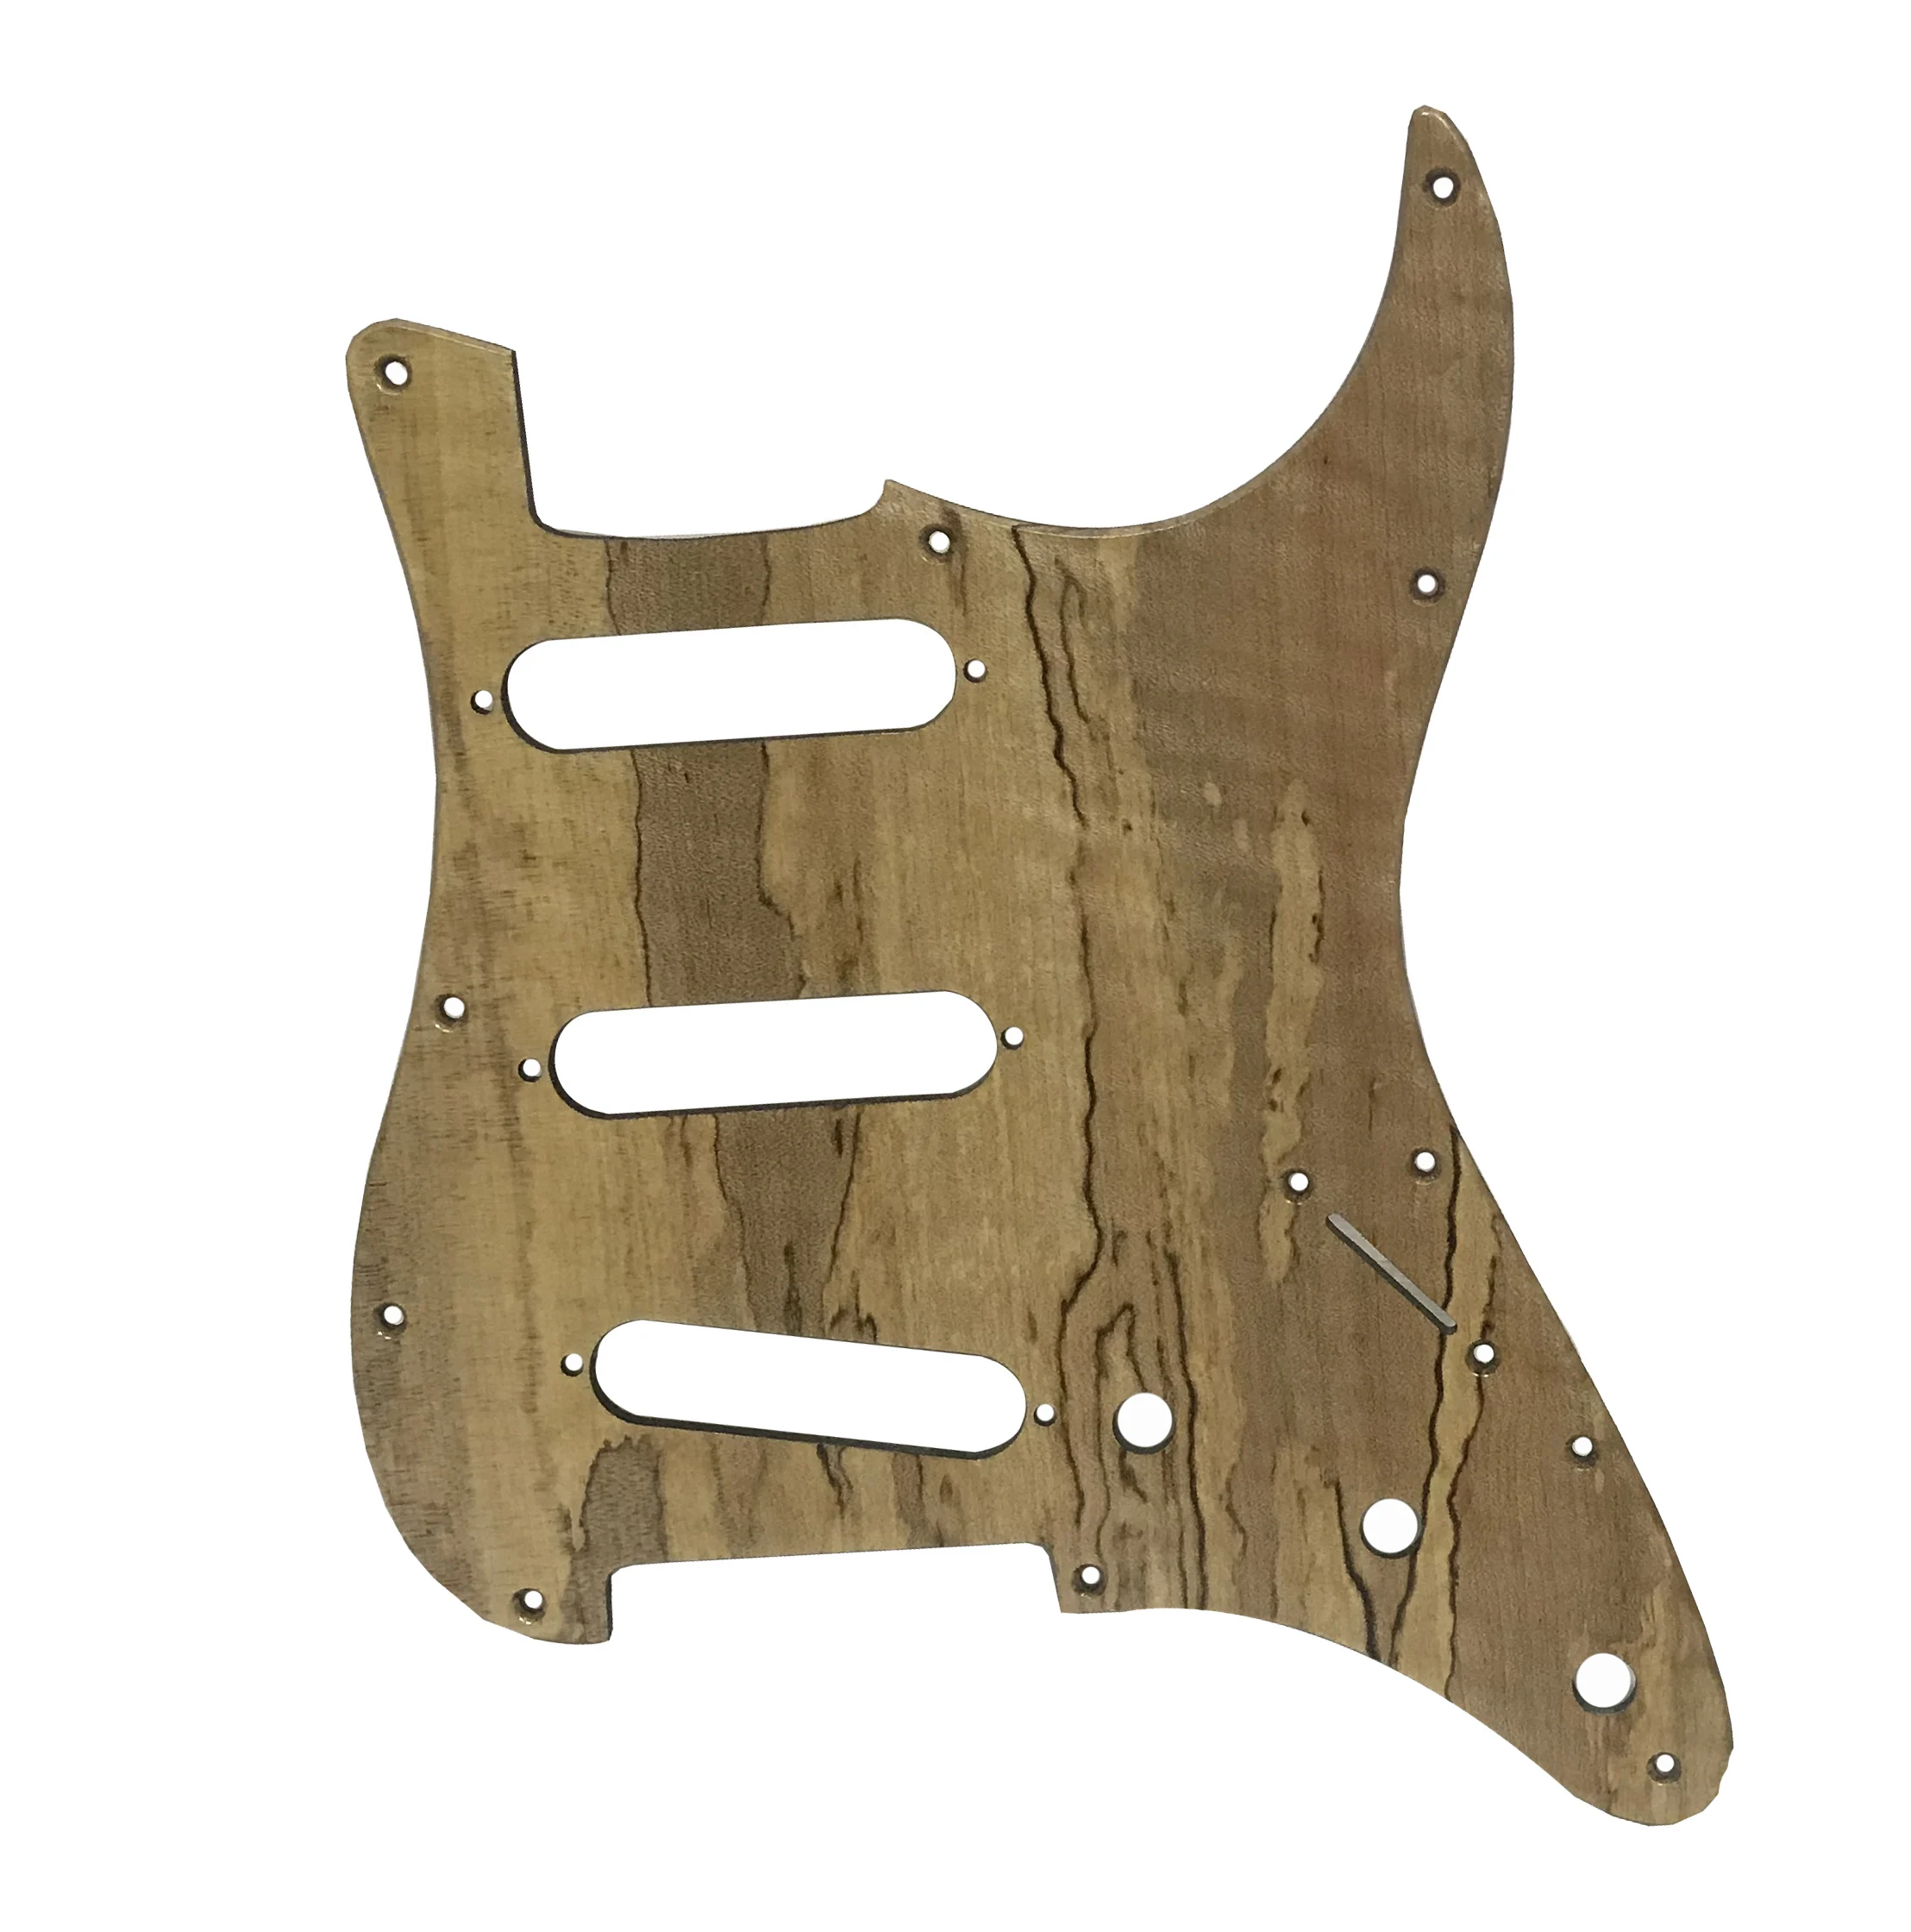 

1 Pcs High Quality Splated Maple Wood Strat Guitar Pickguard Scratch Pick Guard Electric Guitar Plate Solid Wood SSS